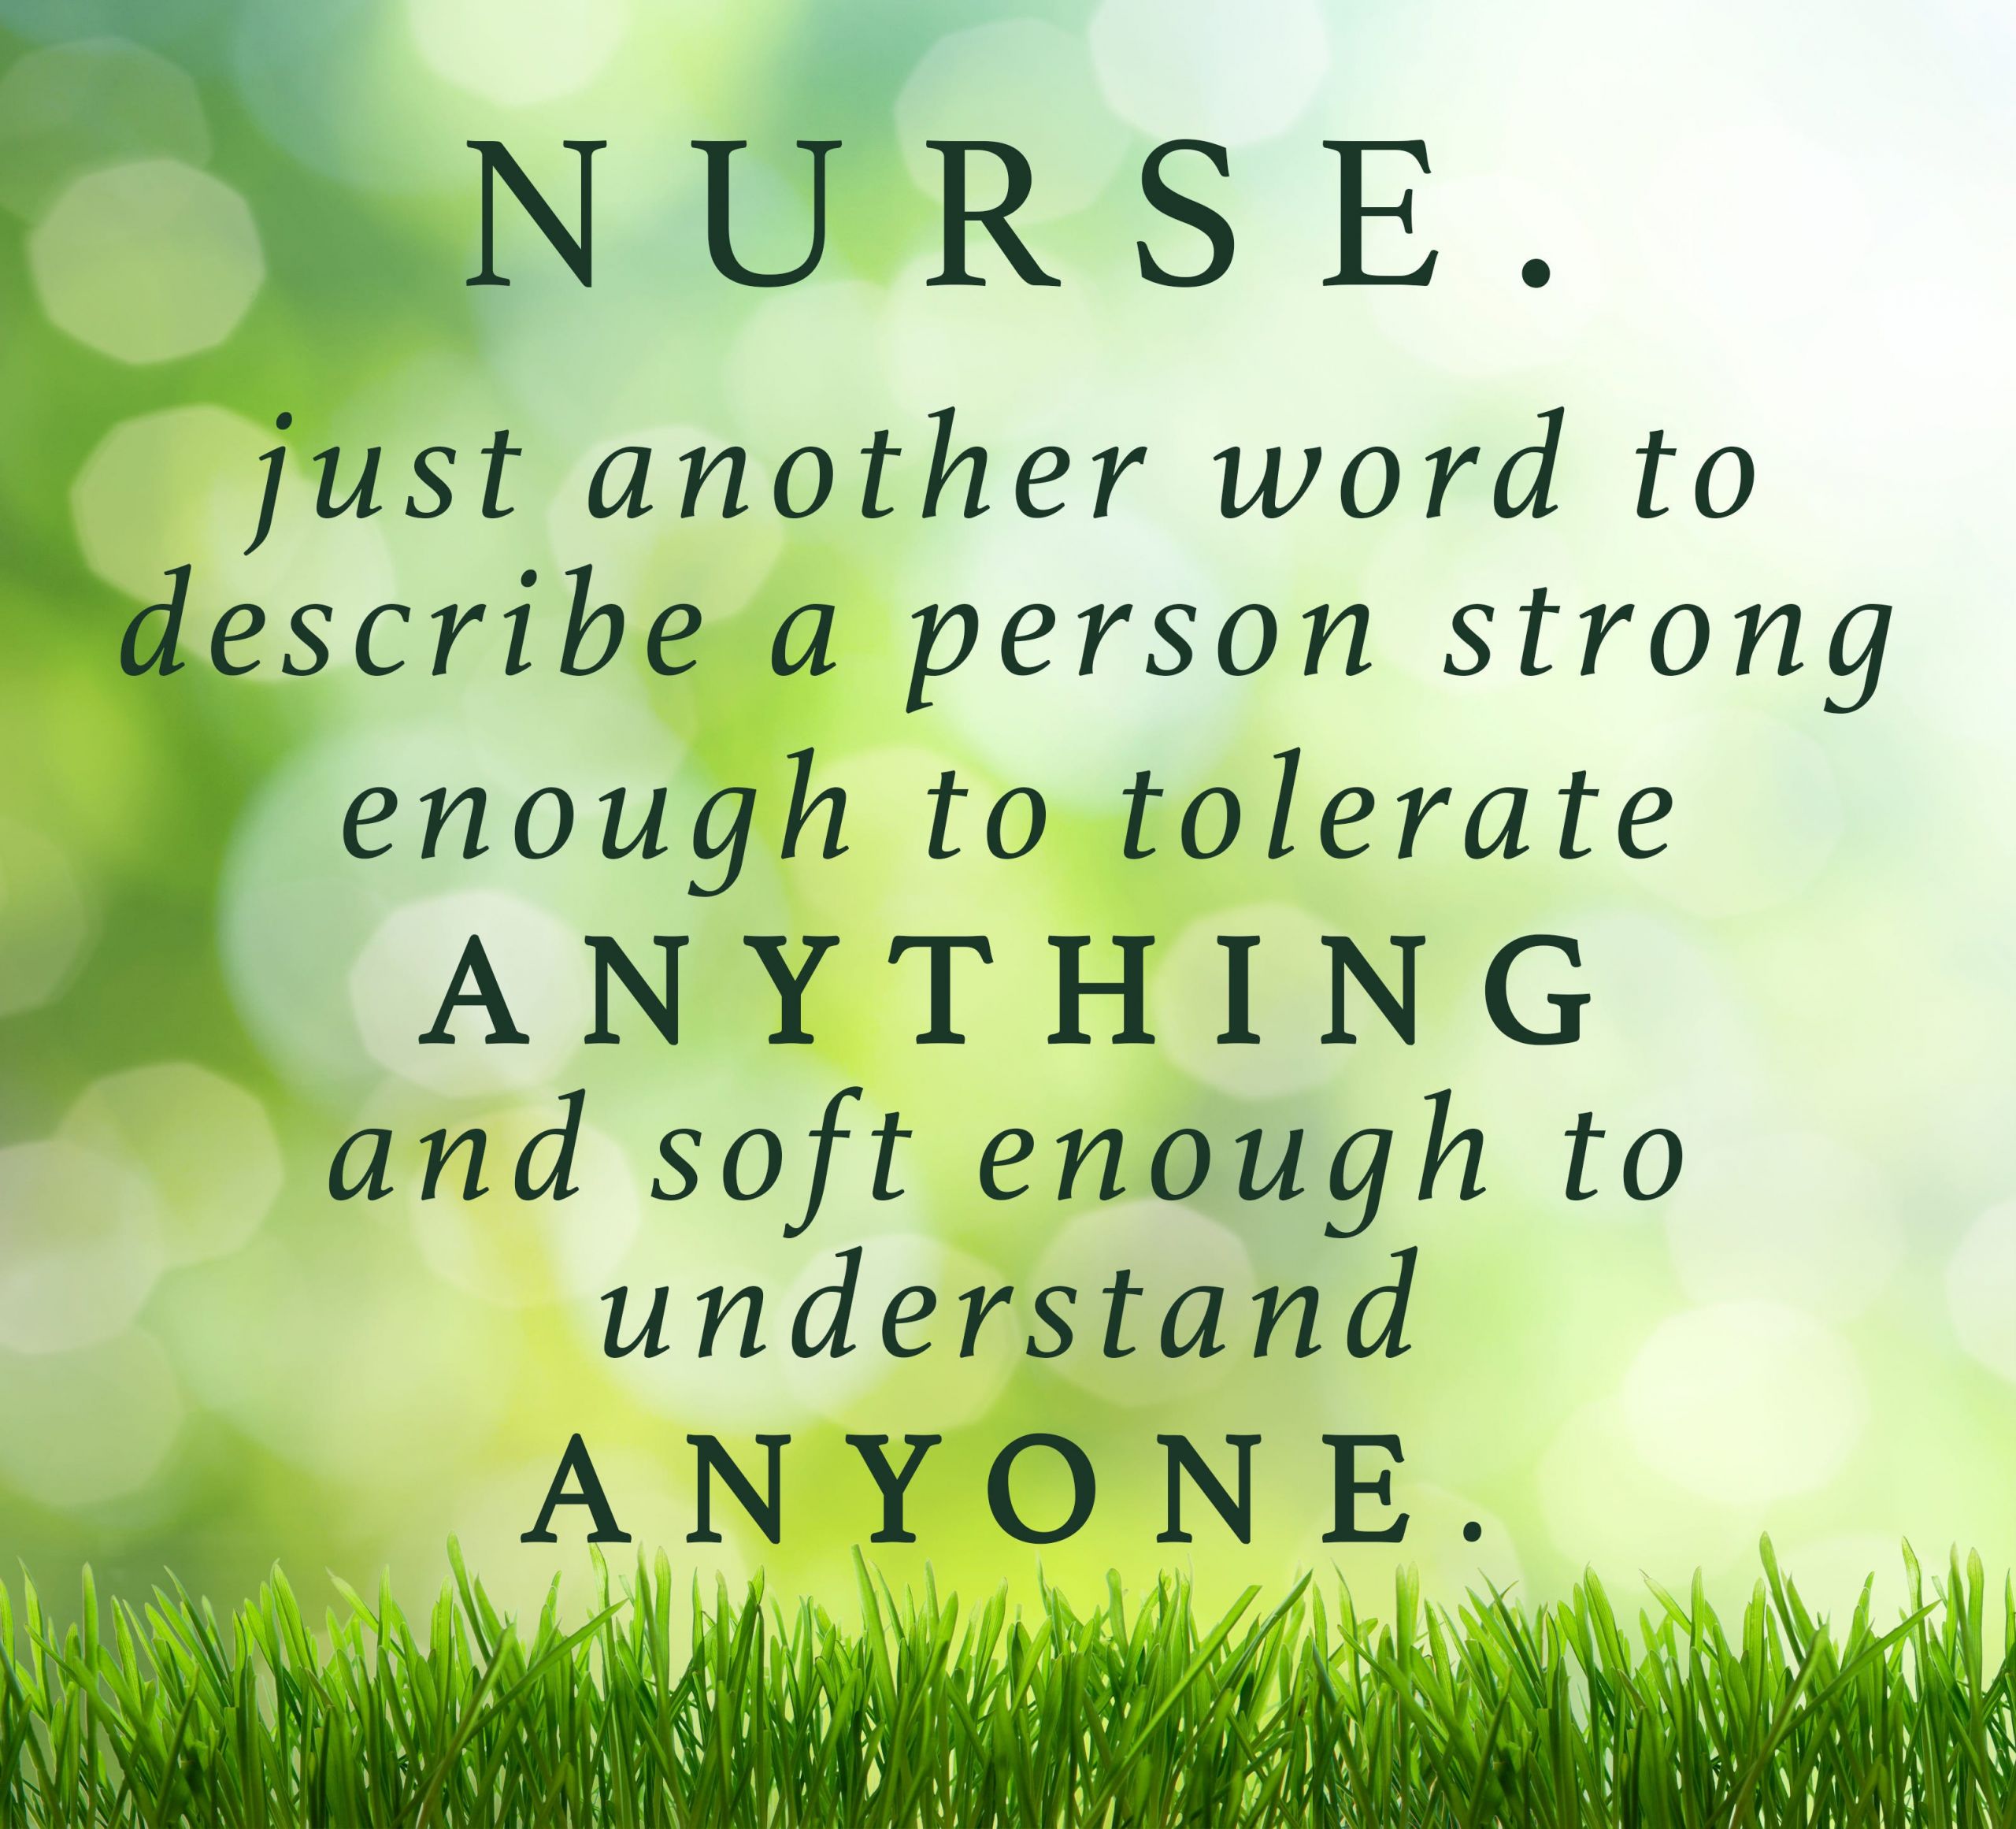 Inspirational Nurse Quotes
 15 Inspirational Quotes About Being A Nurse Enclothed